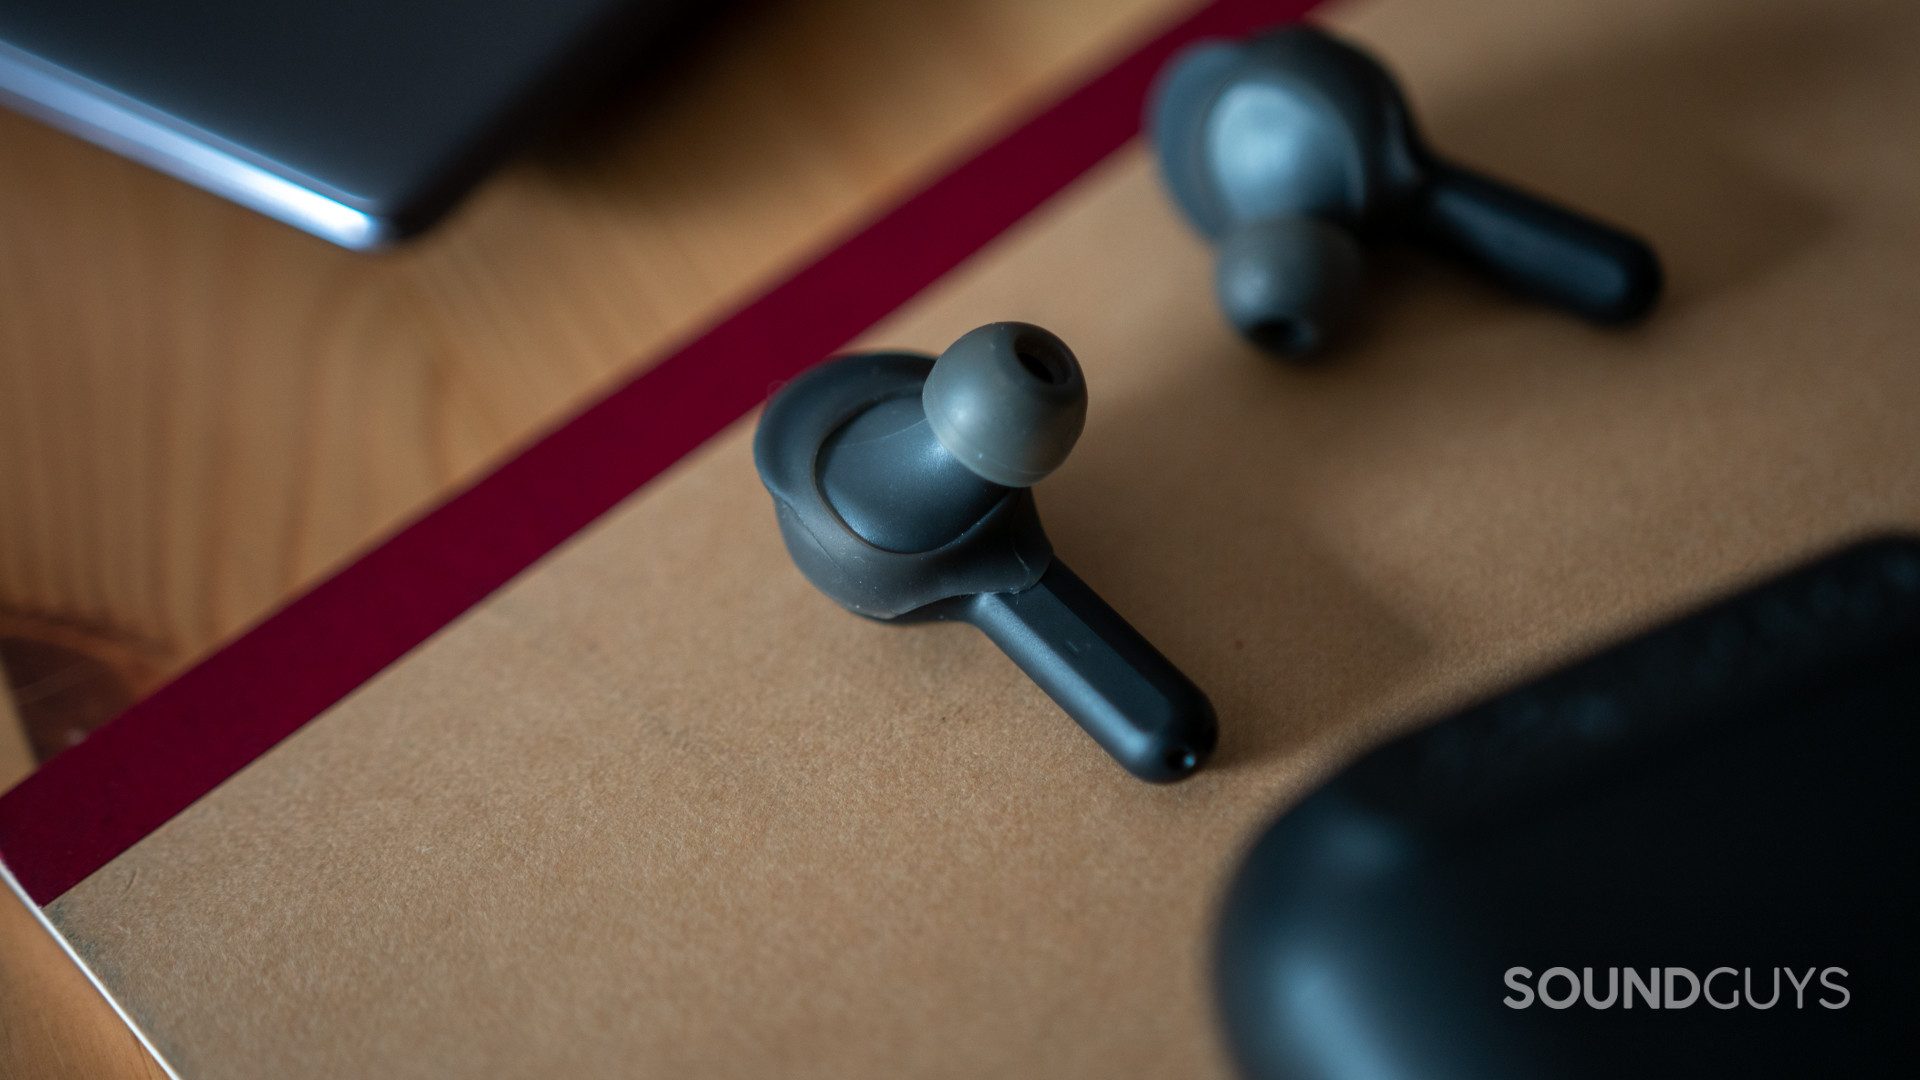 The Skullcandy Indy true wireless earbuds on a notebook.